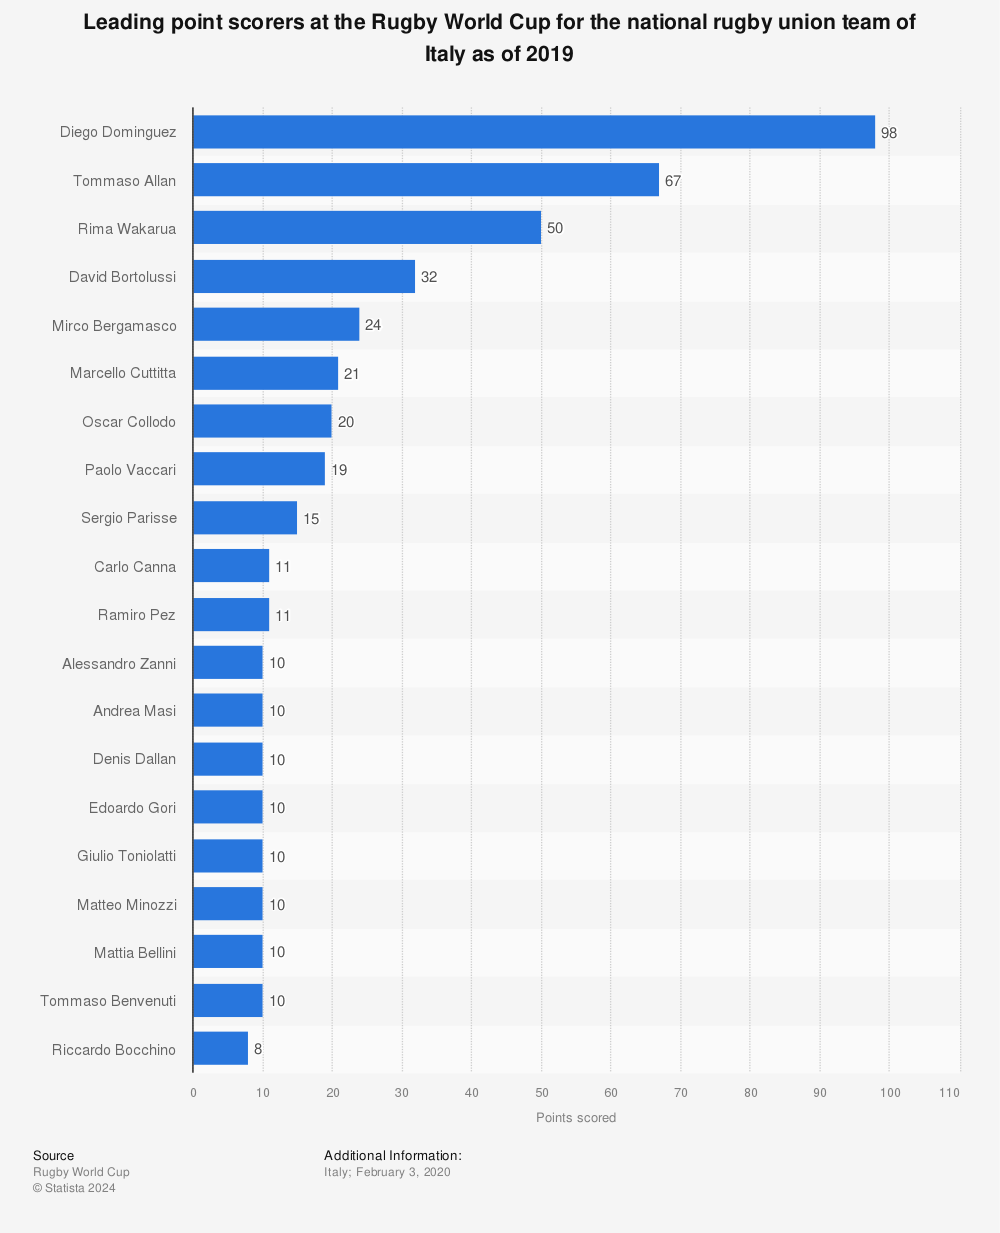 Statistic: Leading point scorers at the Rugby World Cup for the national rugby union team of Italy as of 2019 | Statista